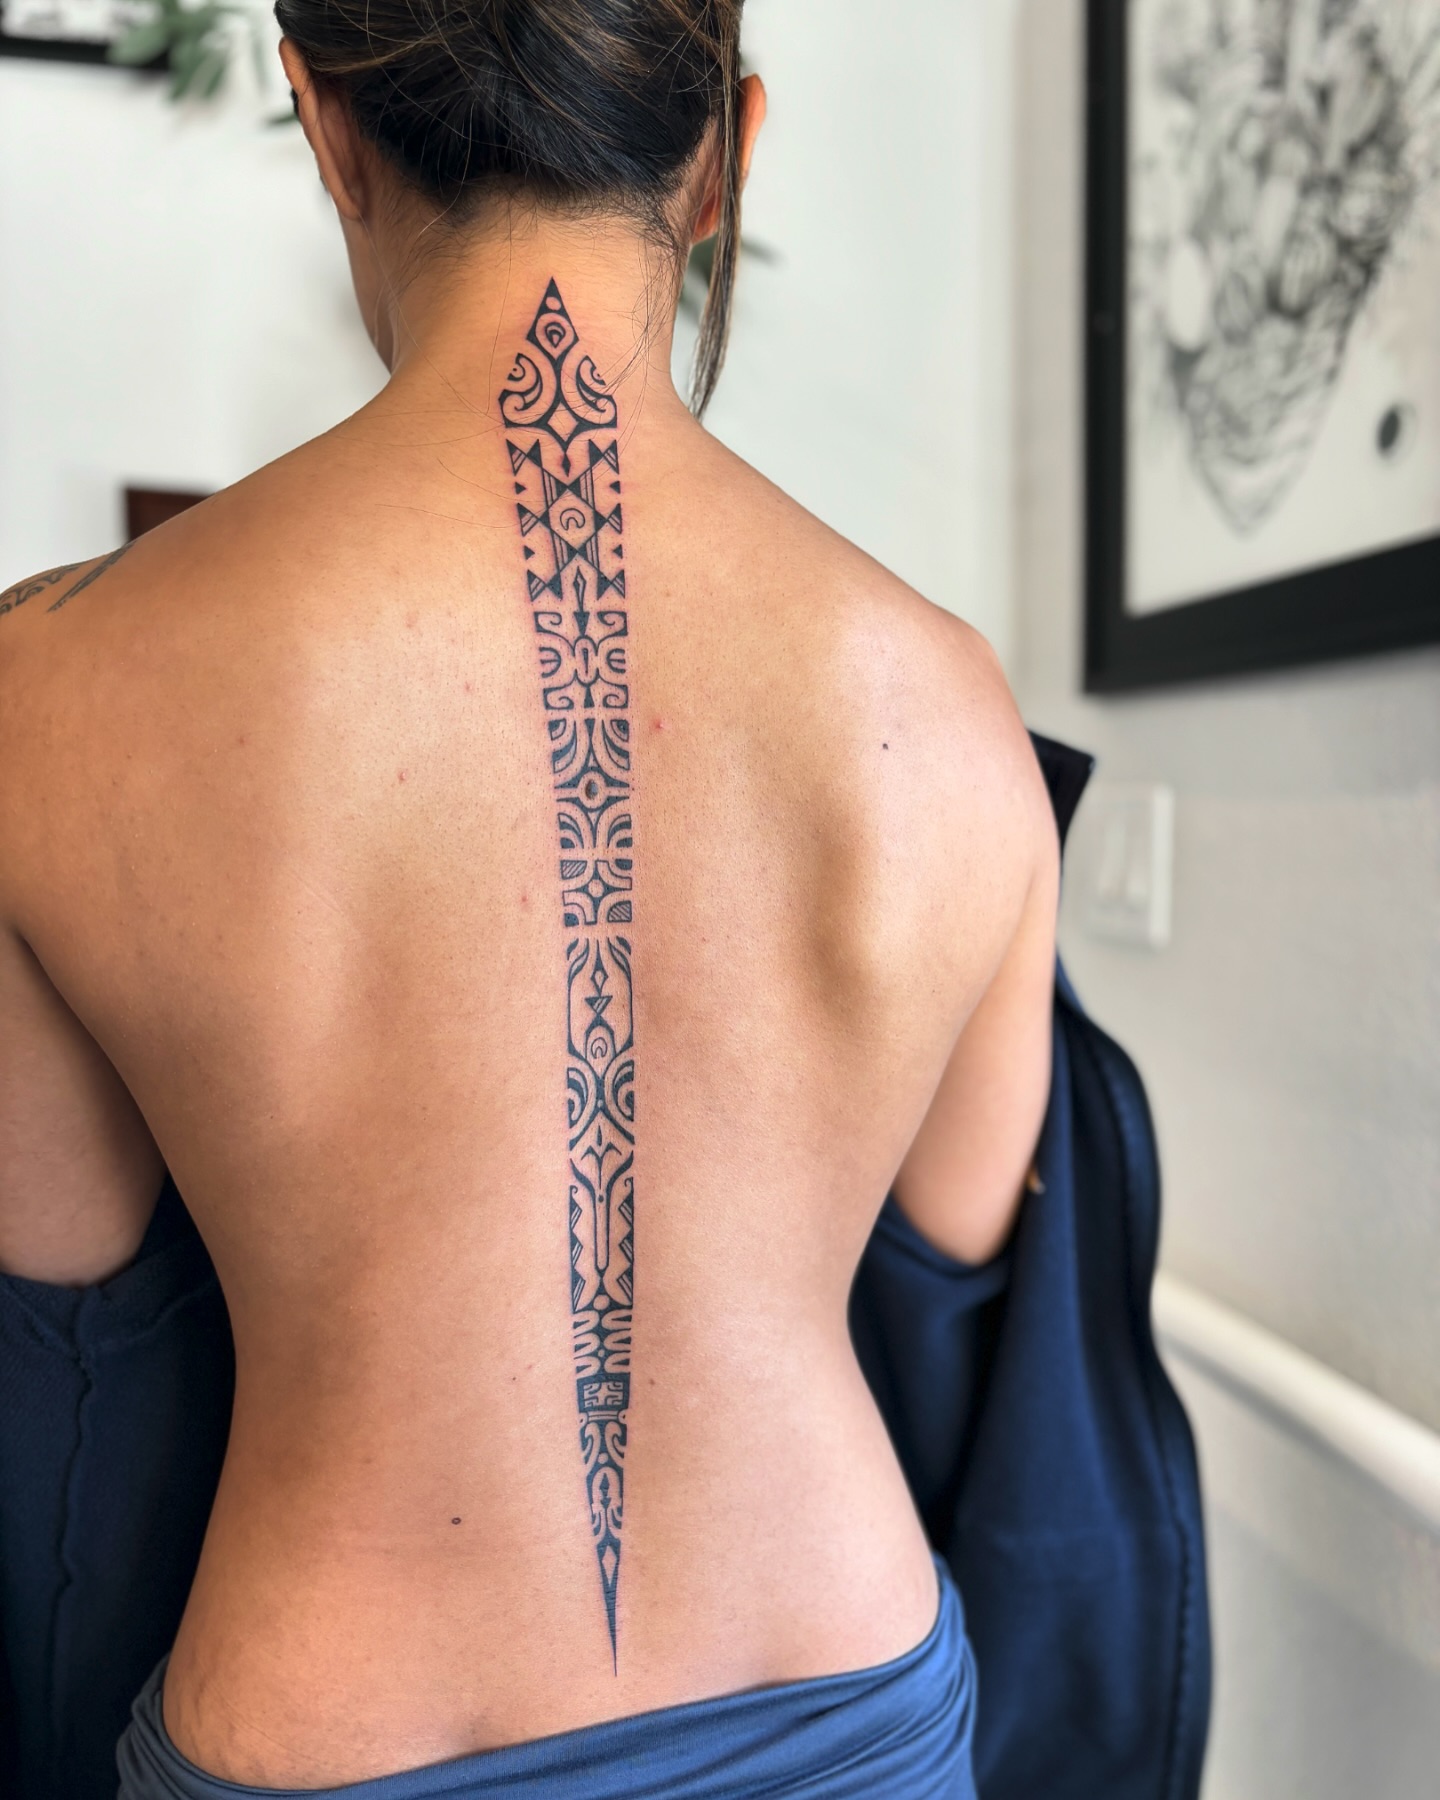 spine tattoo ideas by akb future